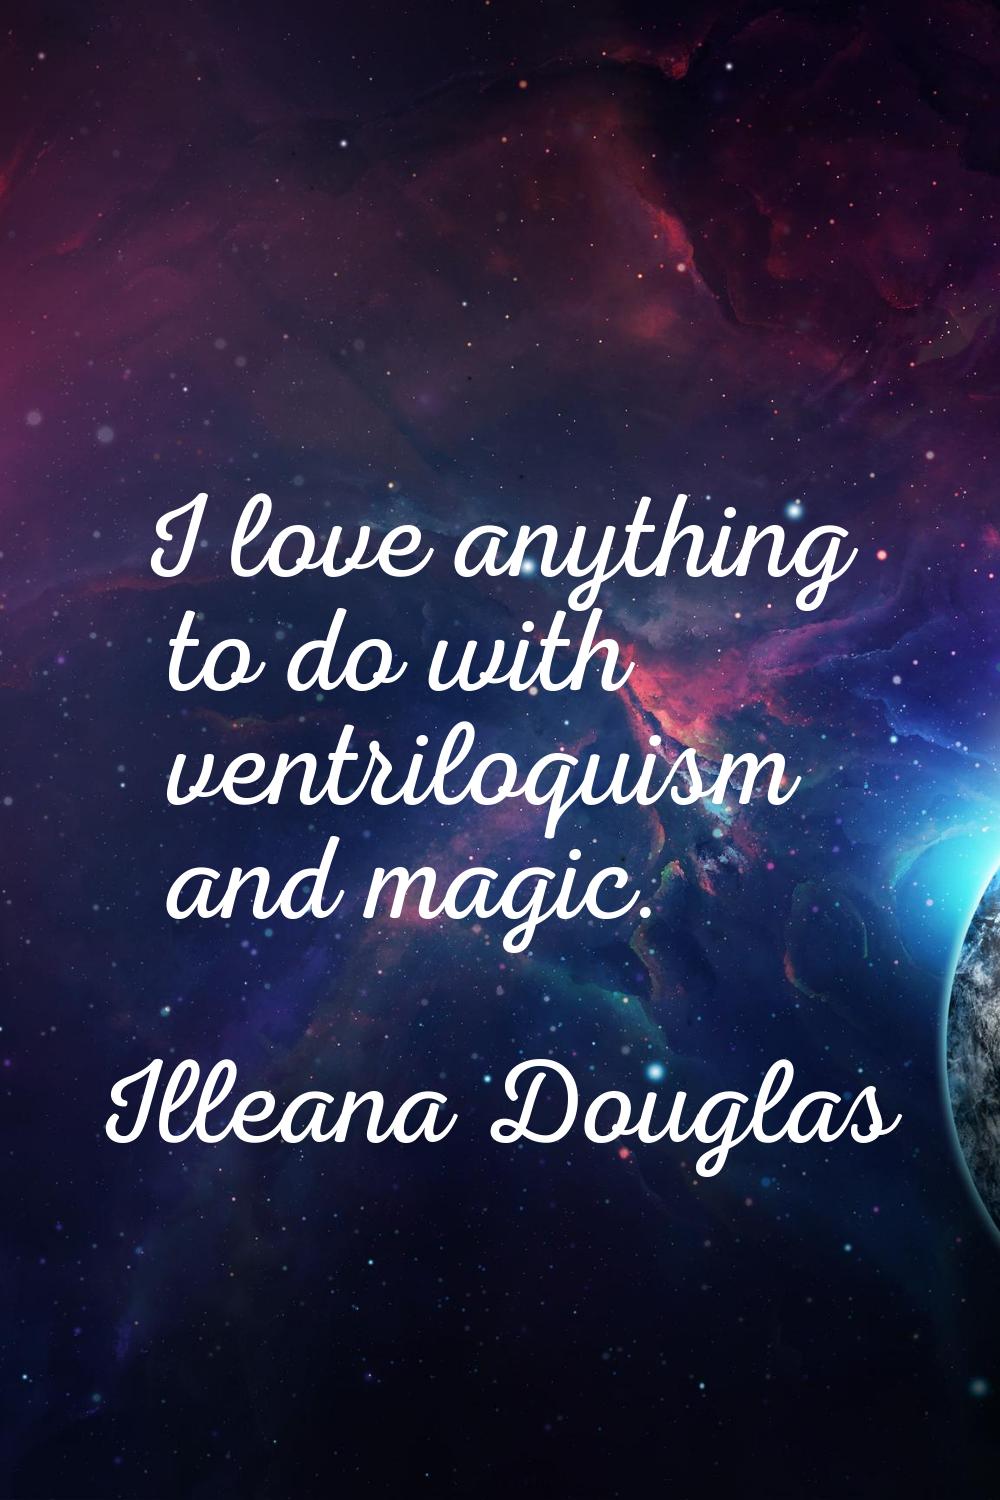 I love anything to do with ventriloquism and magic.